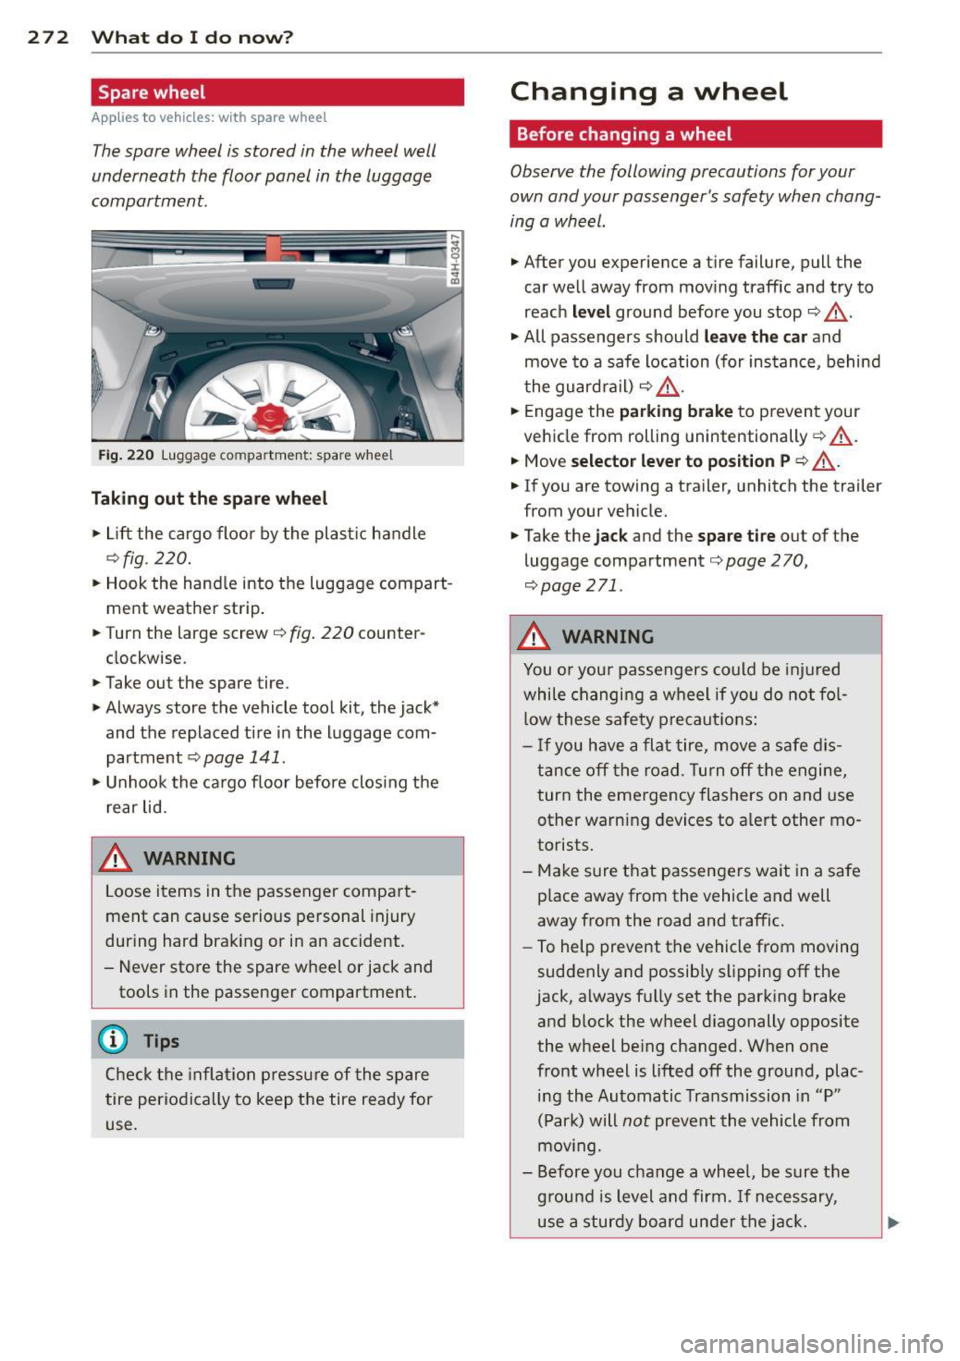 AUDI S8 2014  Owners Manual 272  What  do  I  do  now ? 
Spare wheel 
App lies  to vehicles:  with  spare  wheel 
The spare  wheel  is stored  in the  wheel  well 
underneath  the  floor panel  in the  luggage 
compartment. 
Fig